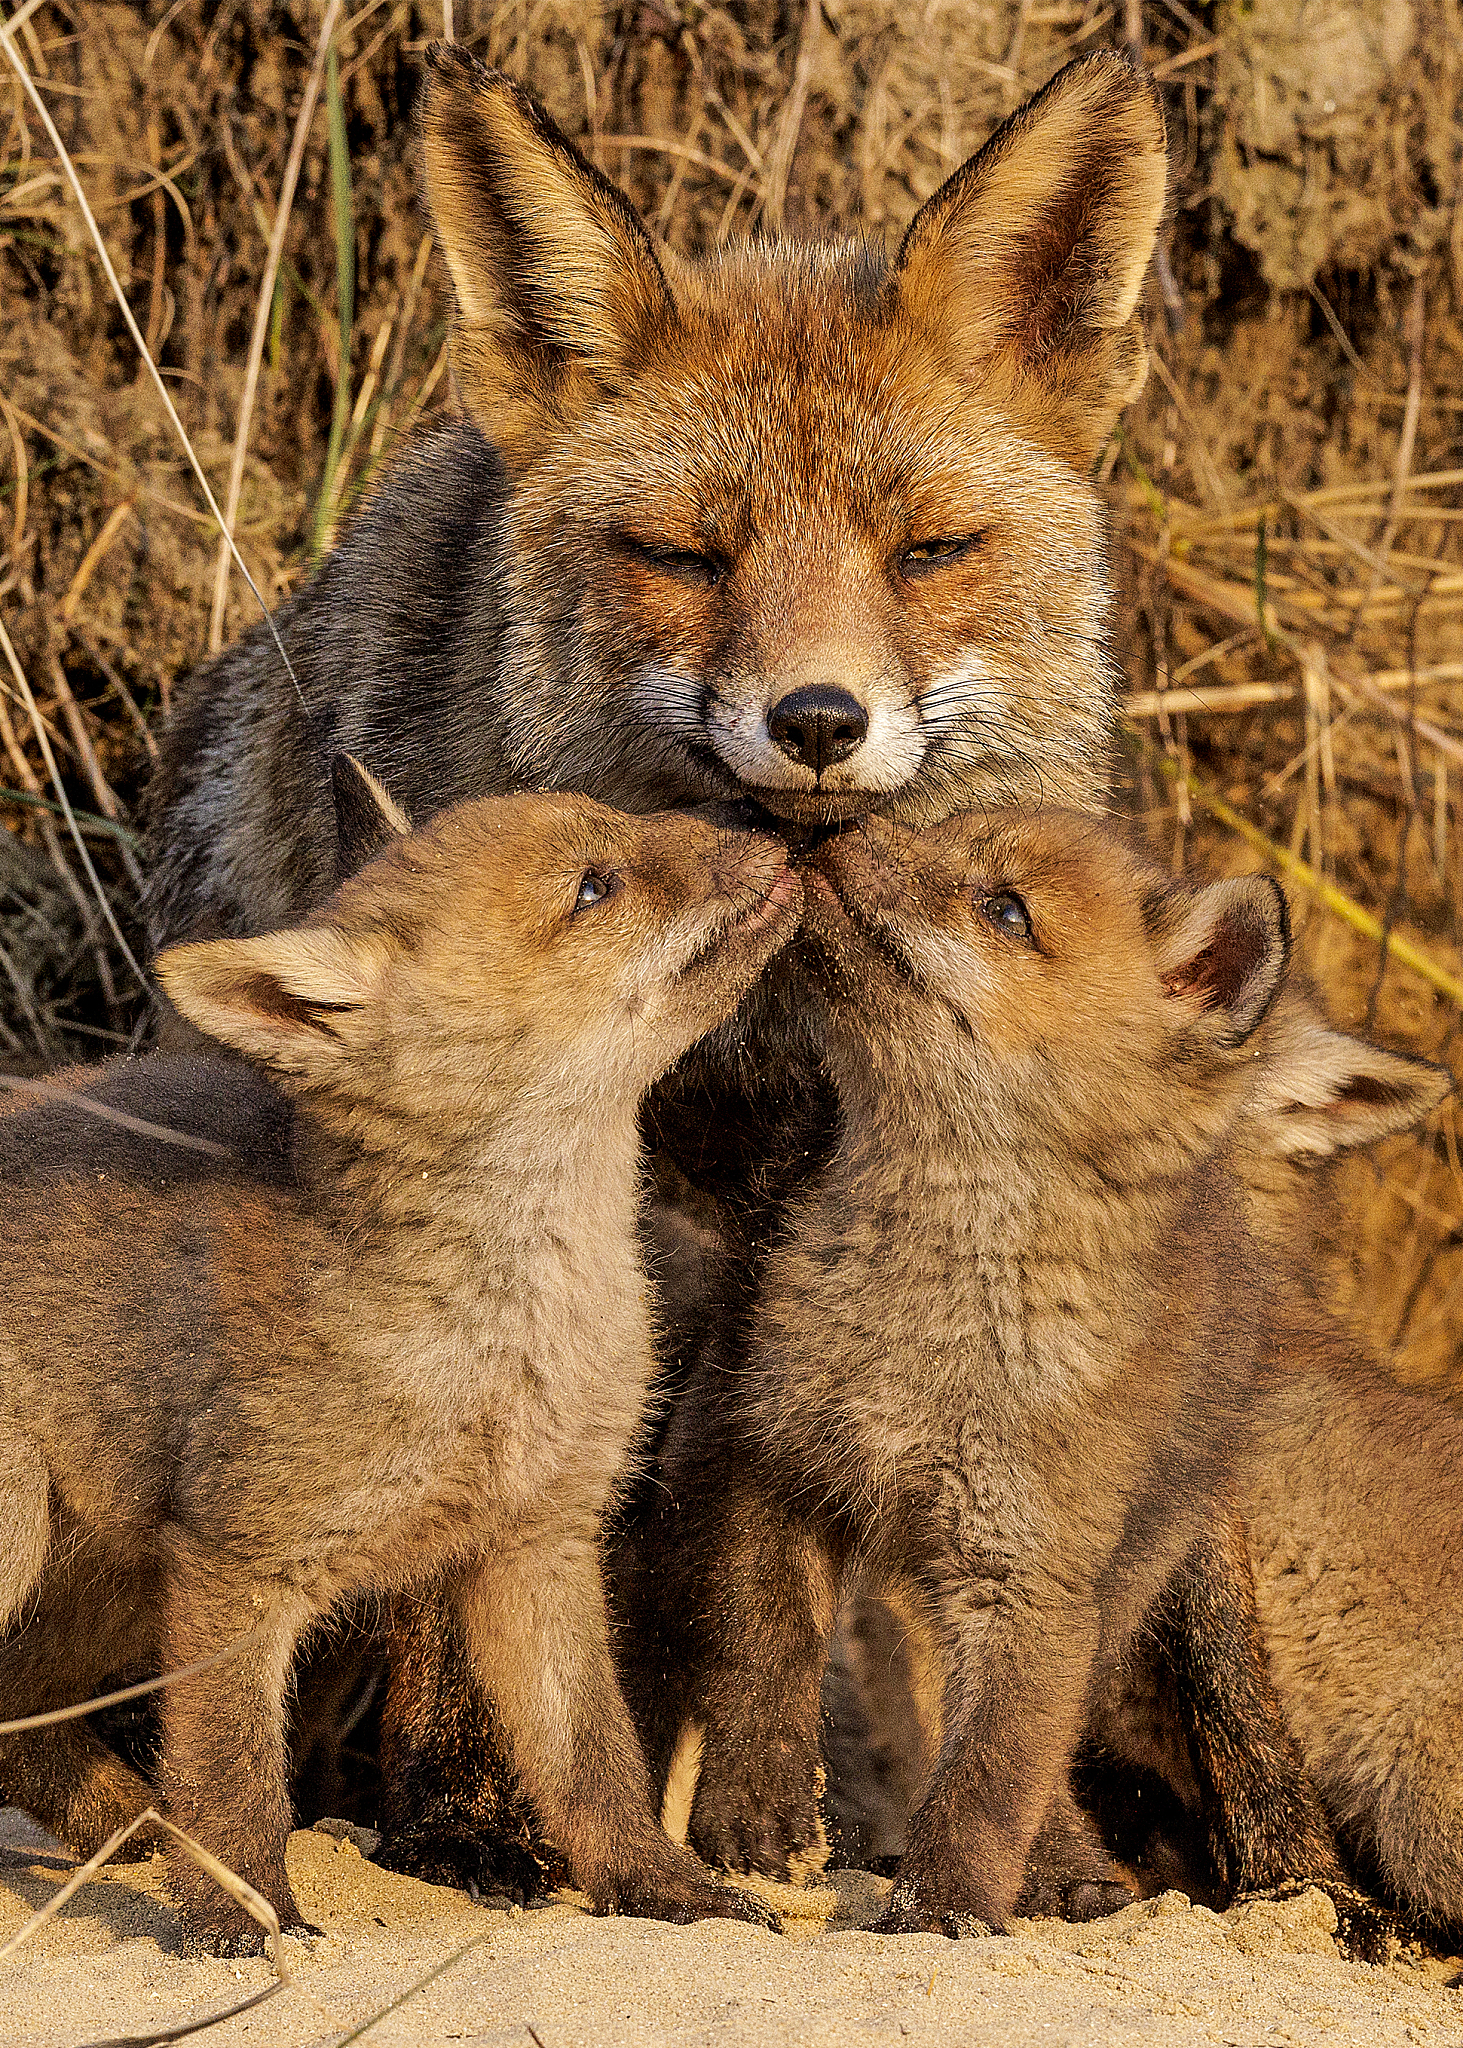 During a feed, playful fox cubs snuggle up to their mother, pestering her for more food. The eyes-half-closed mother and the cubs were spotted in Zandvoort, the Netherlands. /CFP